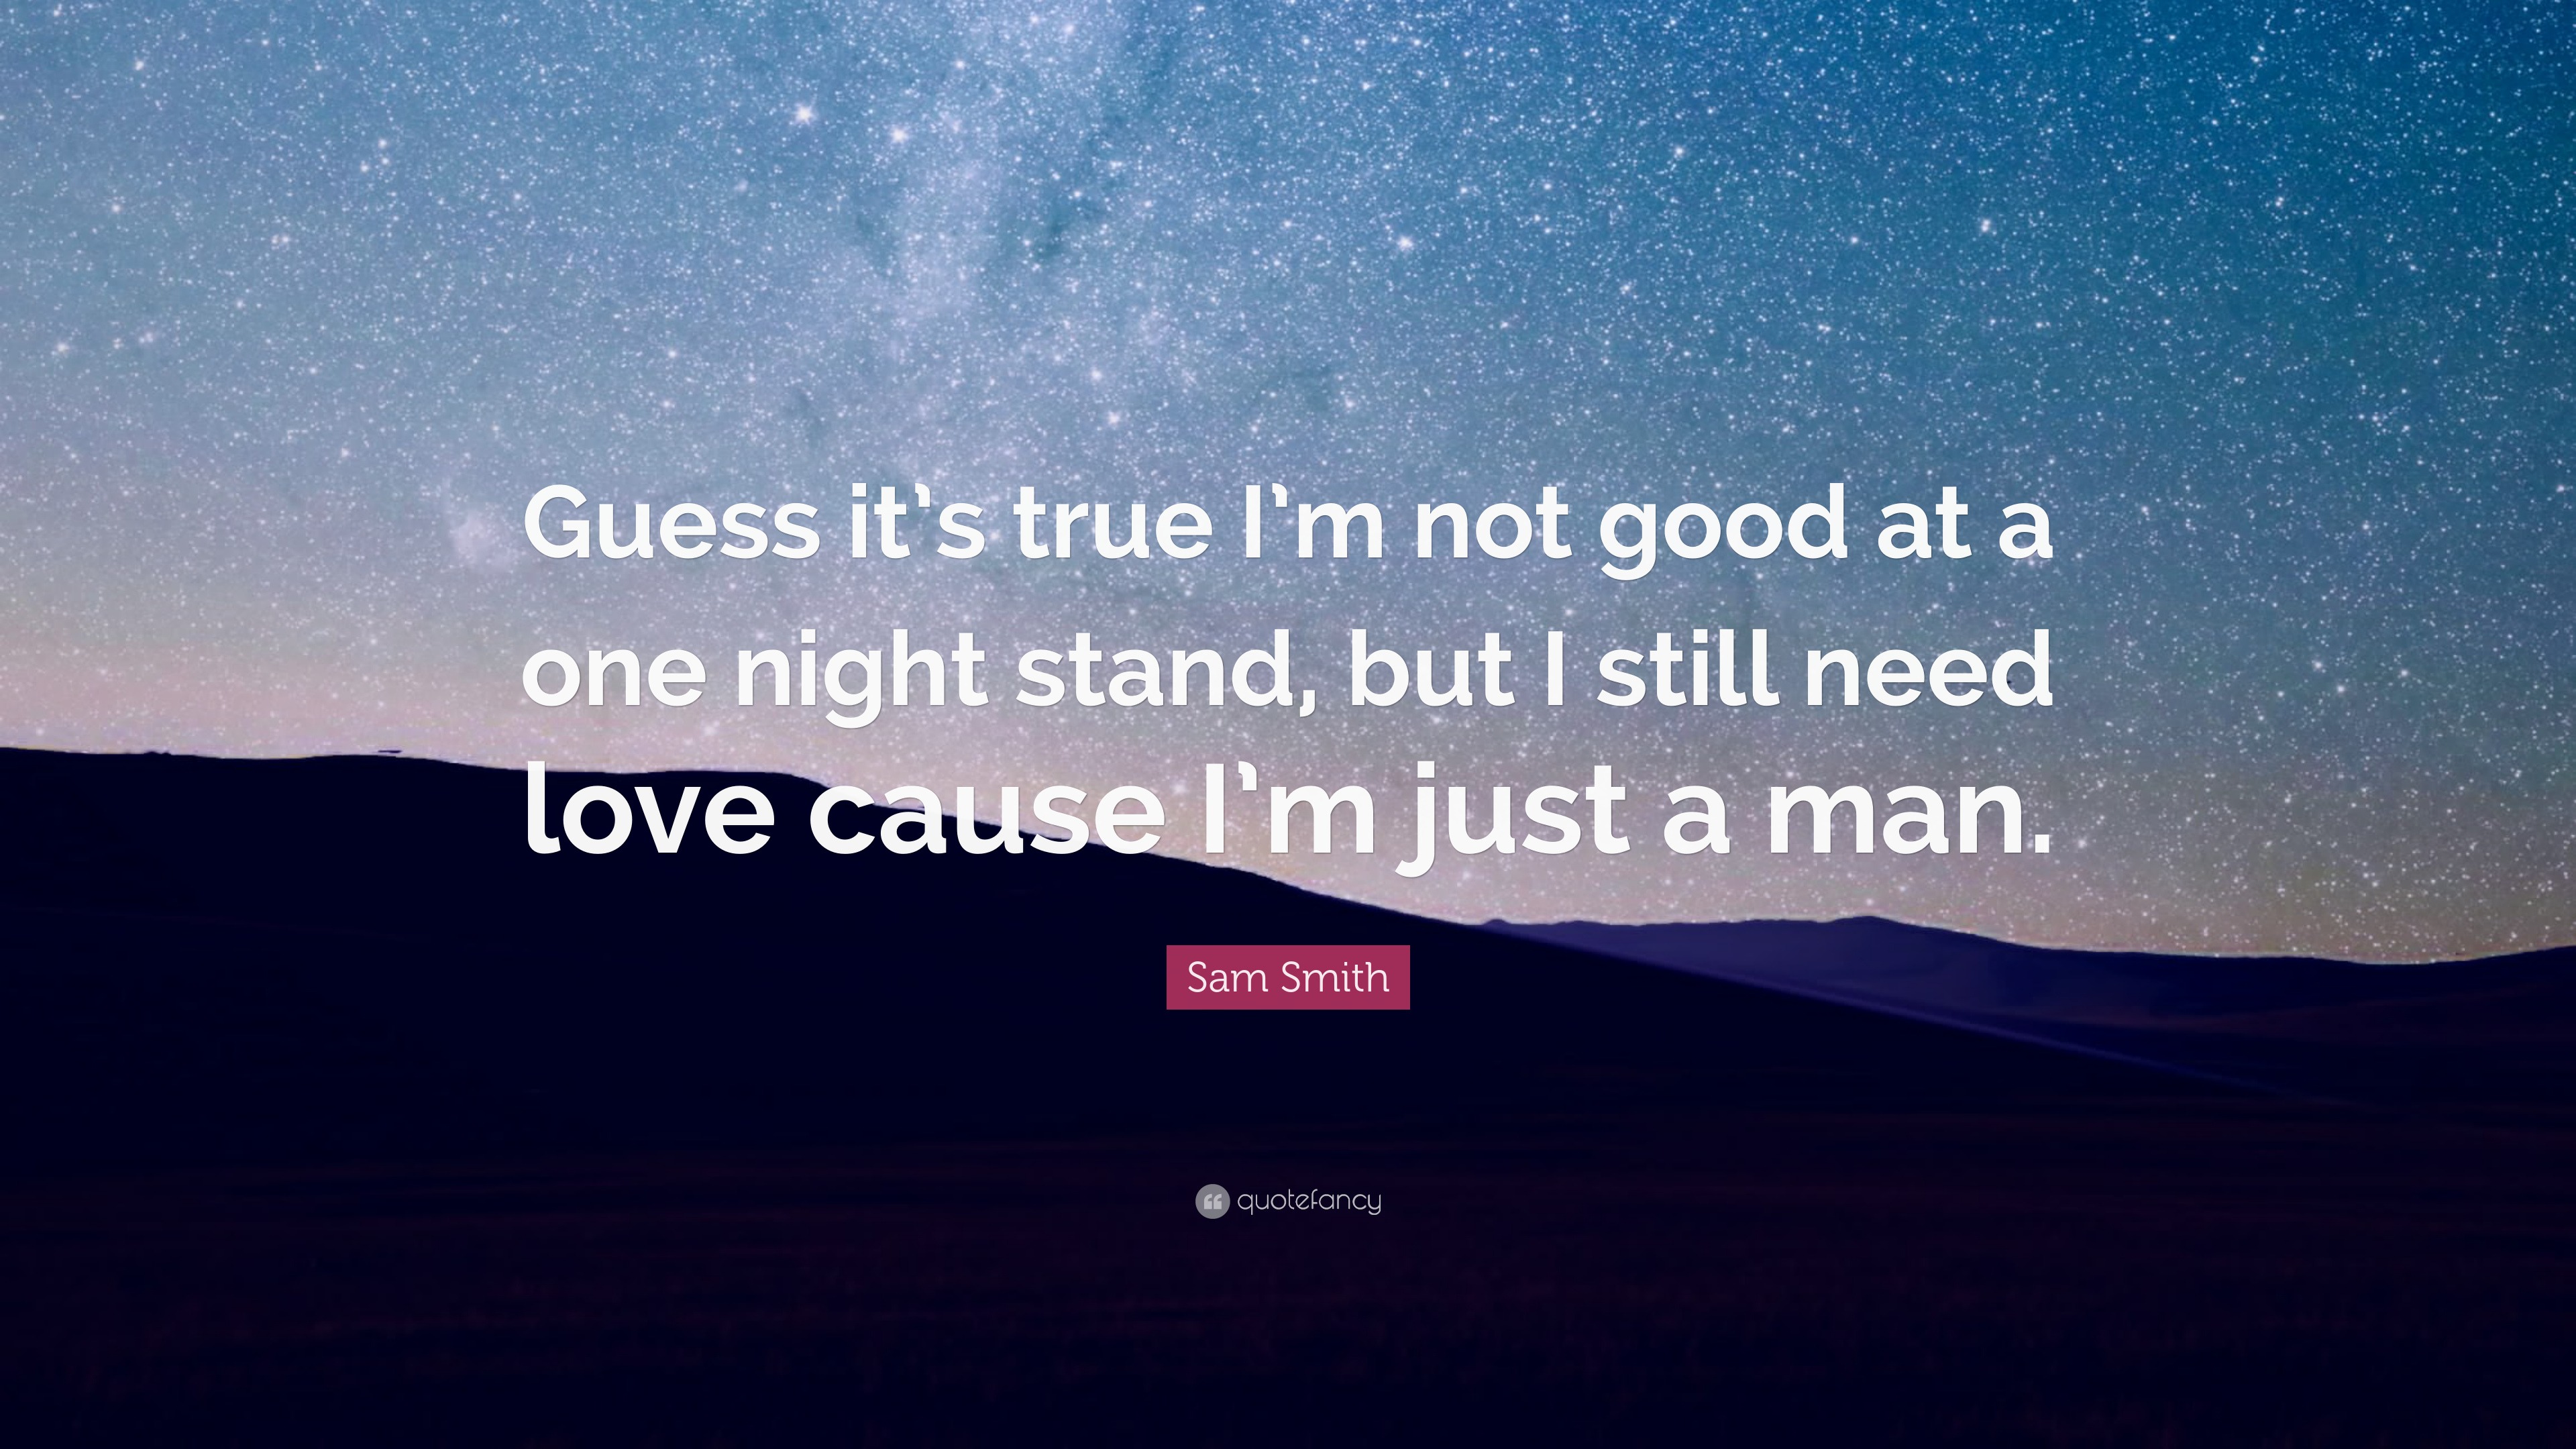 Sam Smith Quote: “Guess it's true I'm not good at a one night stand, but